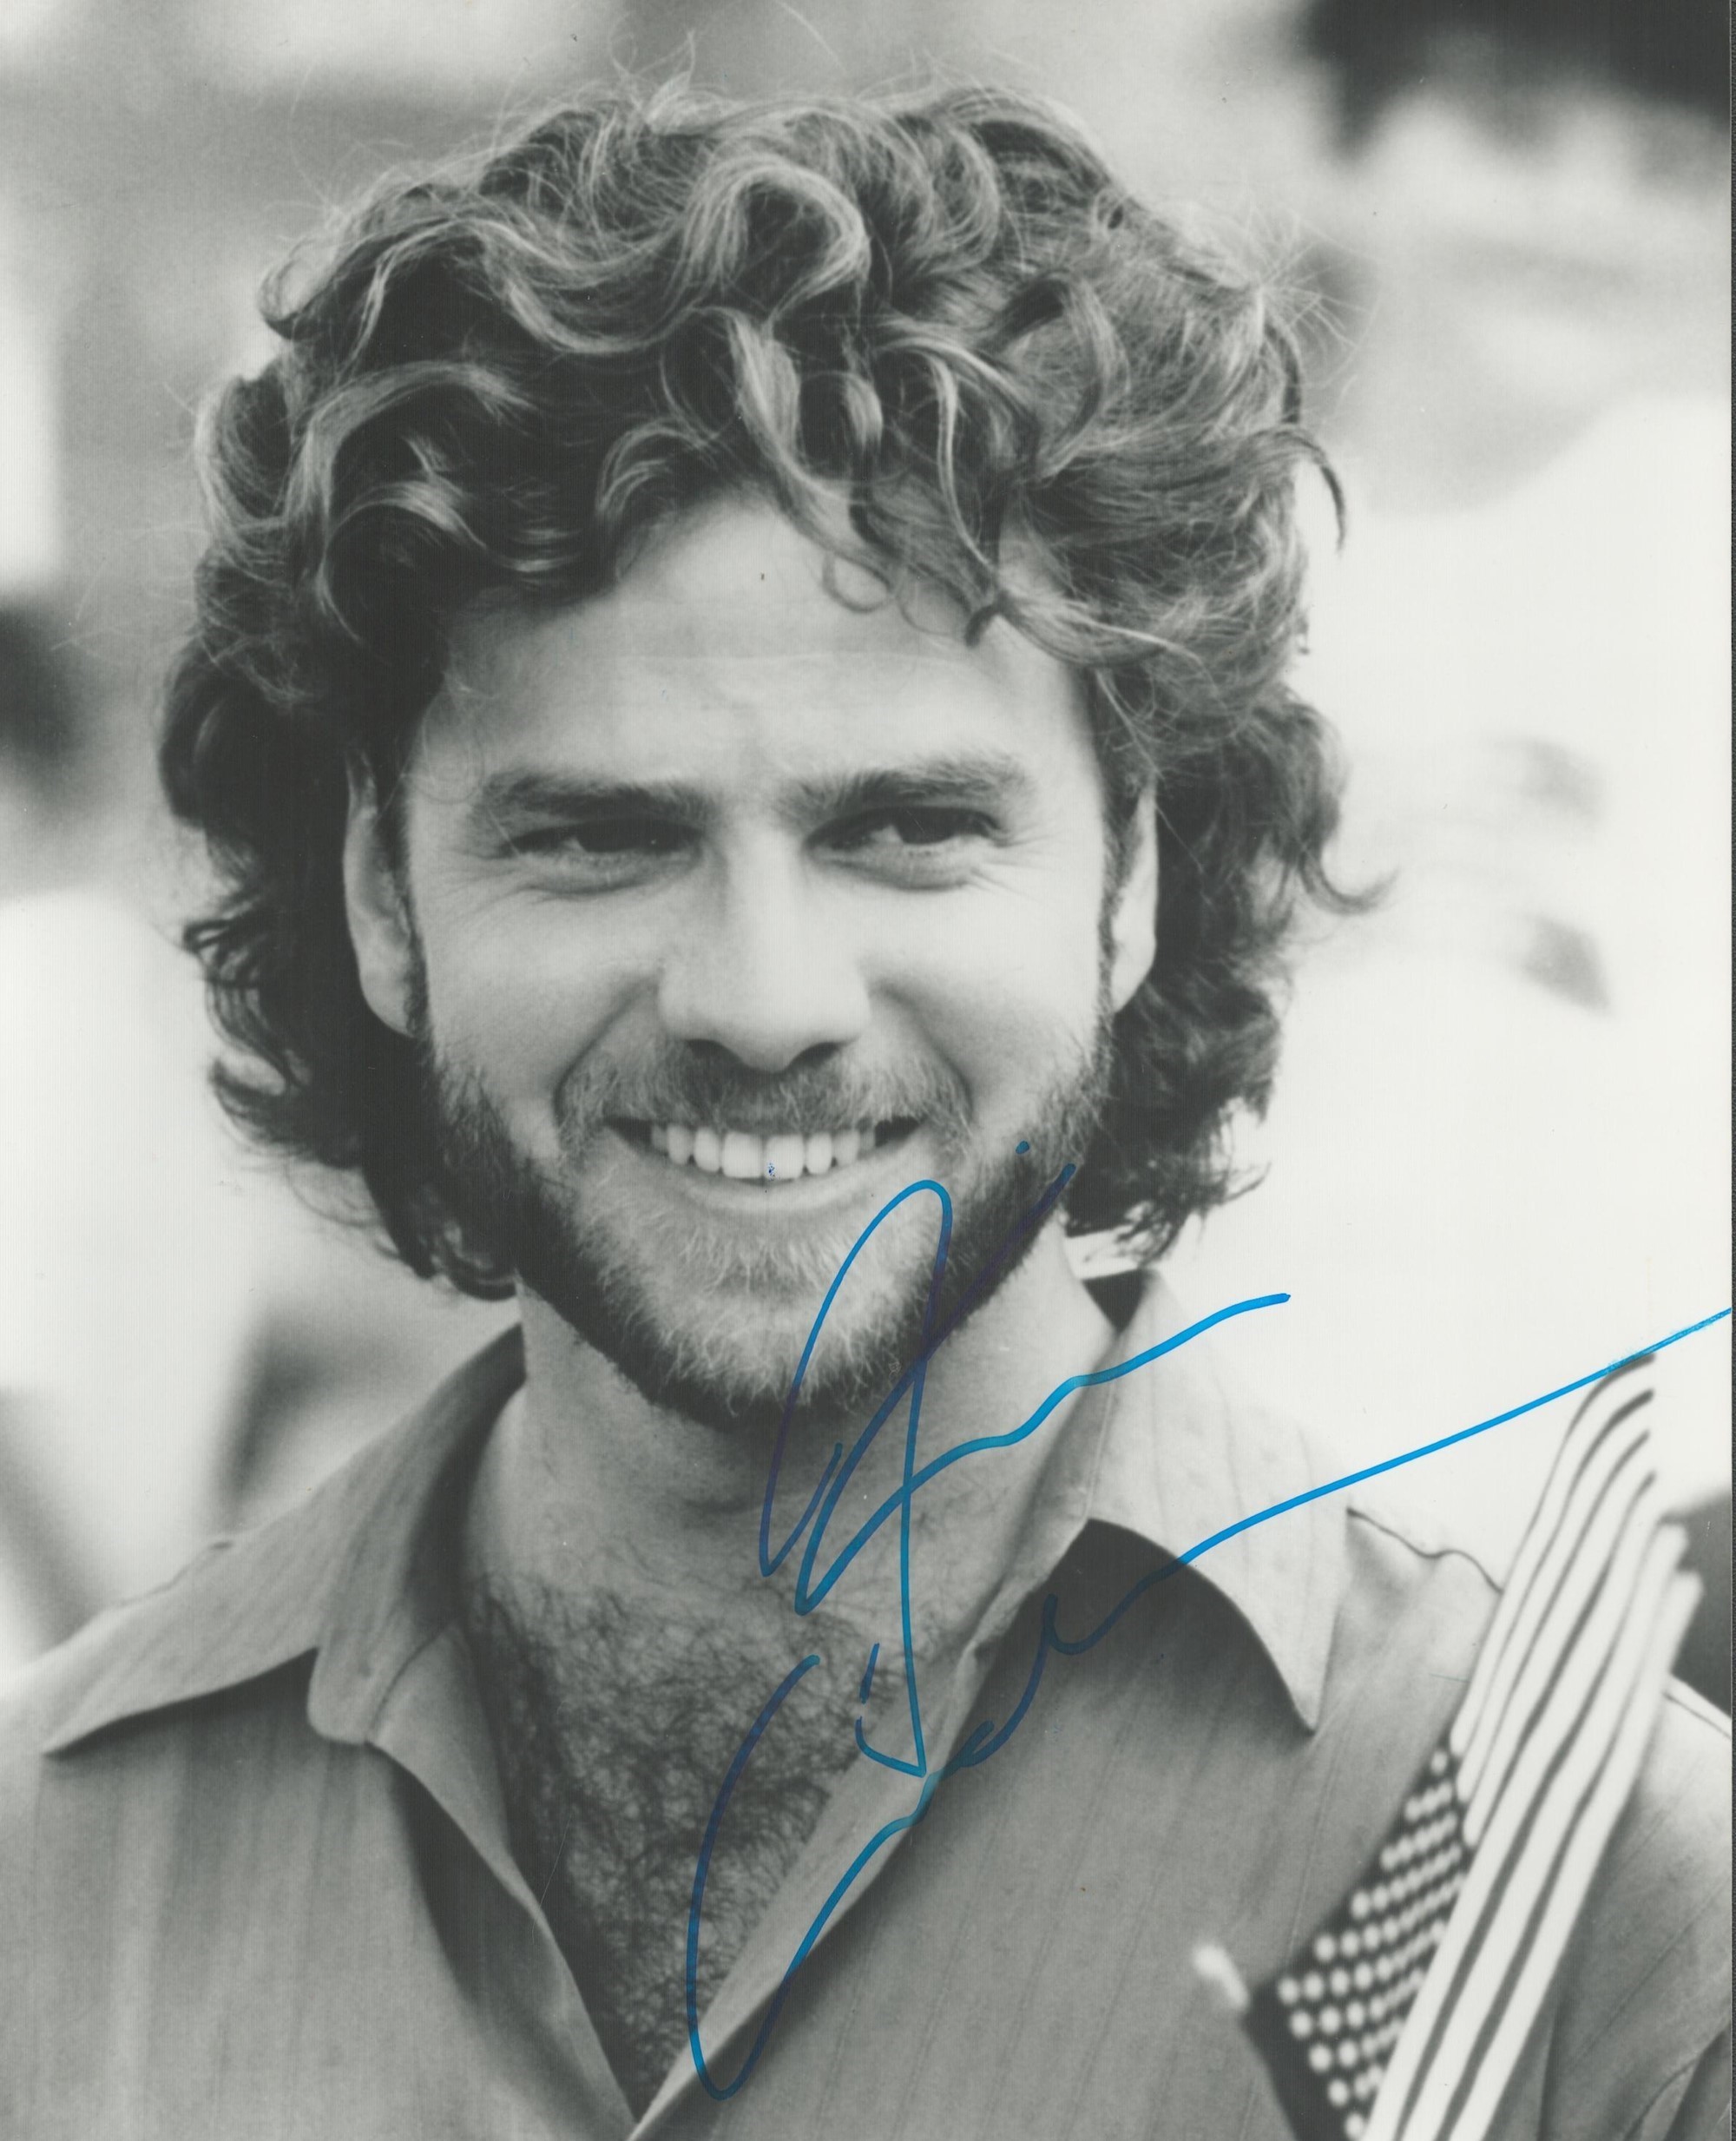 Actor, Kevin Anderson signed 10x8 black and white photograph. Anderson is perhaps most known for his